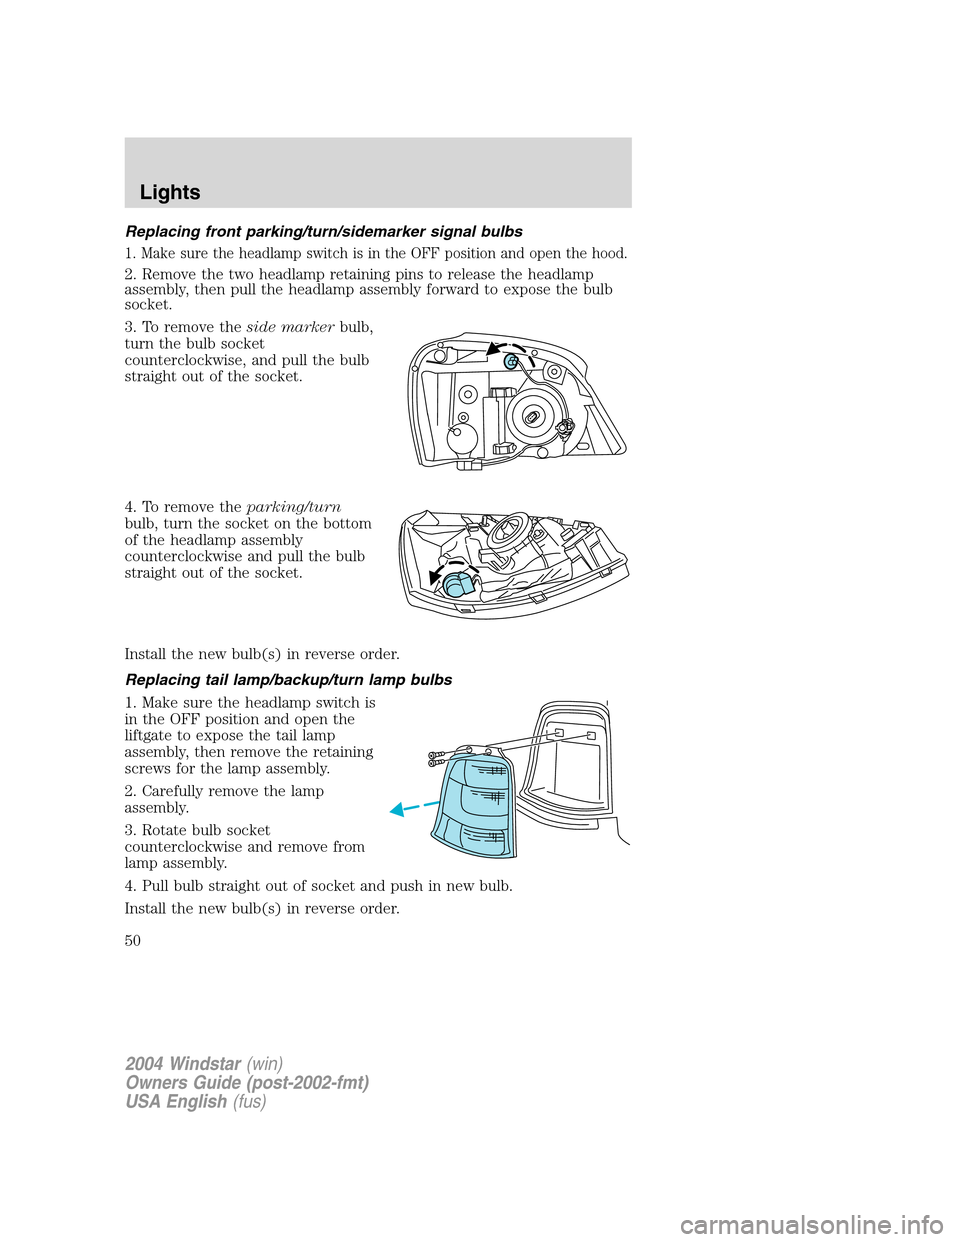 FORD FREESTAR 2004 1.G Service Manual Replacing front parking/turn/sidemarker signal bulbs
1. Make sure the headlamp switch is in the OFF position and open the hood.
2. Remove the two headlamp retaining pins to release the headlamp
assemb